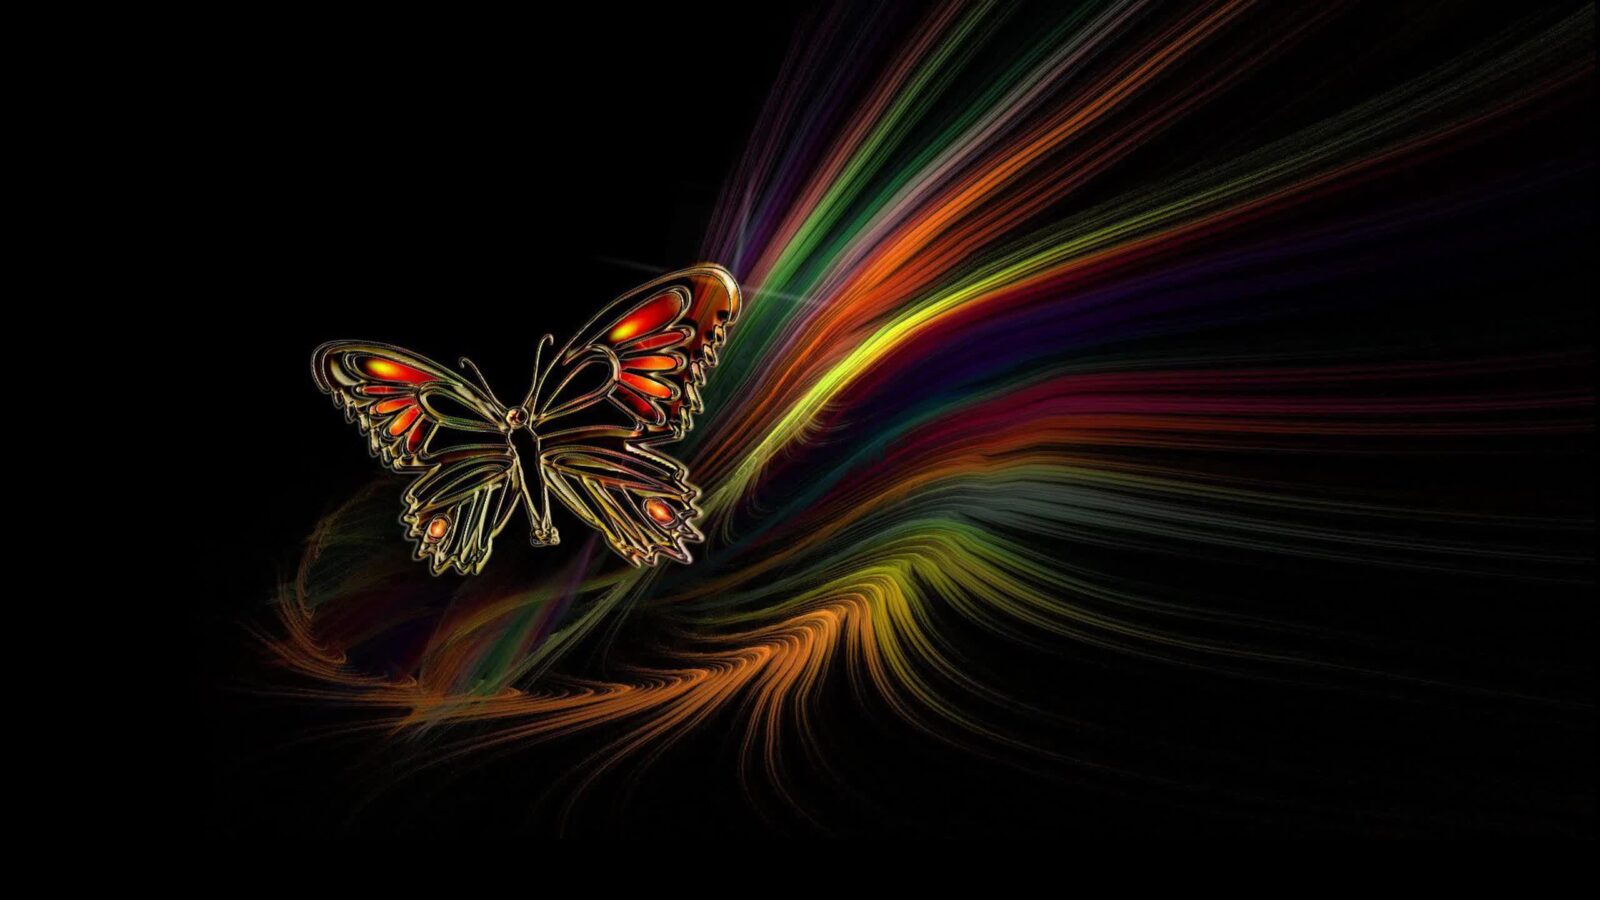 LiveWallpapers4Free.com | Colorful Butterfly Abstract 2K Artwork - Animated Desktop Wallpaper